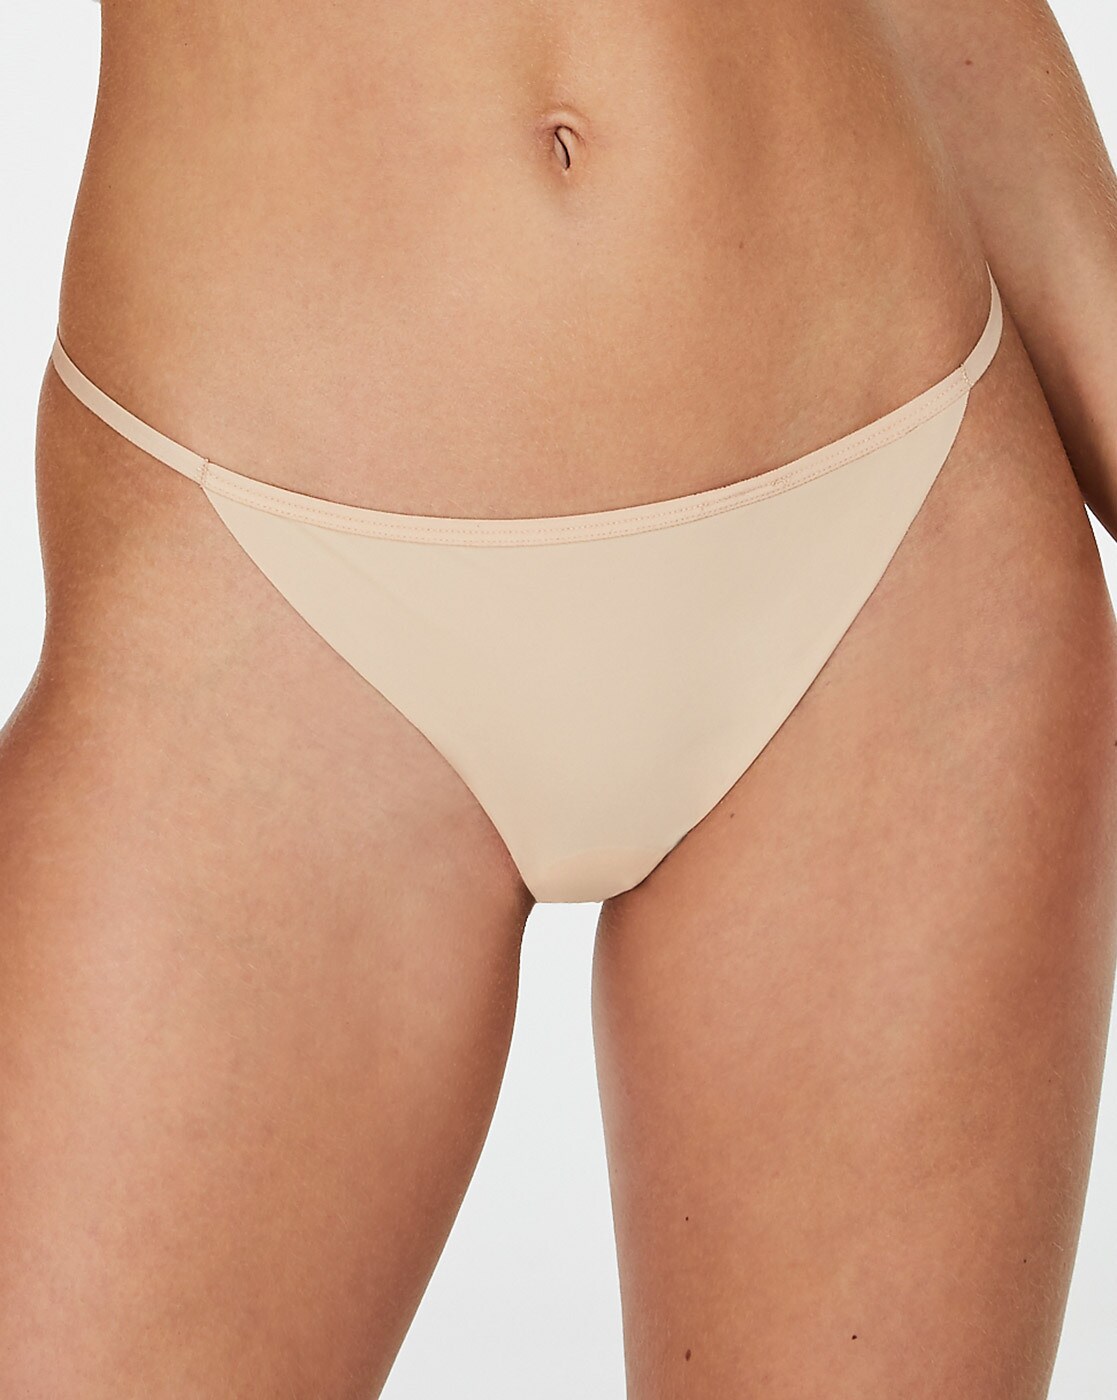 Micro G-string Pink Foil White Trim Clear Straps -  Norway